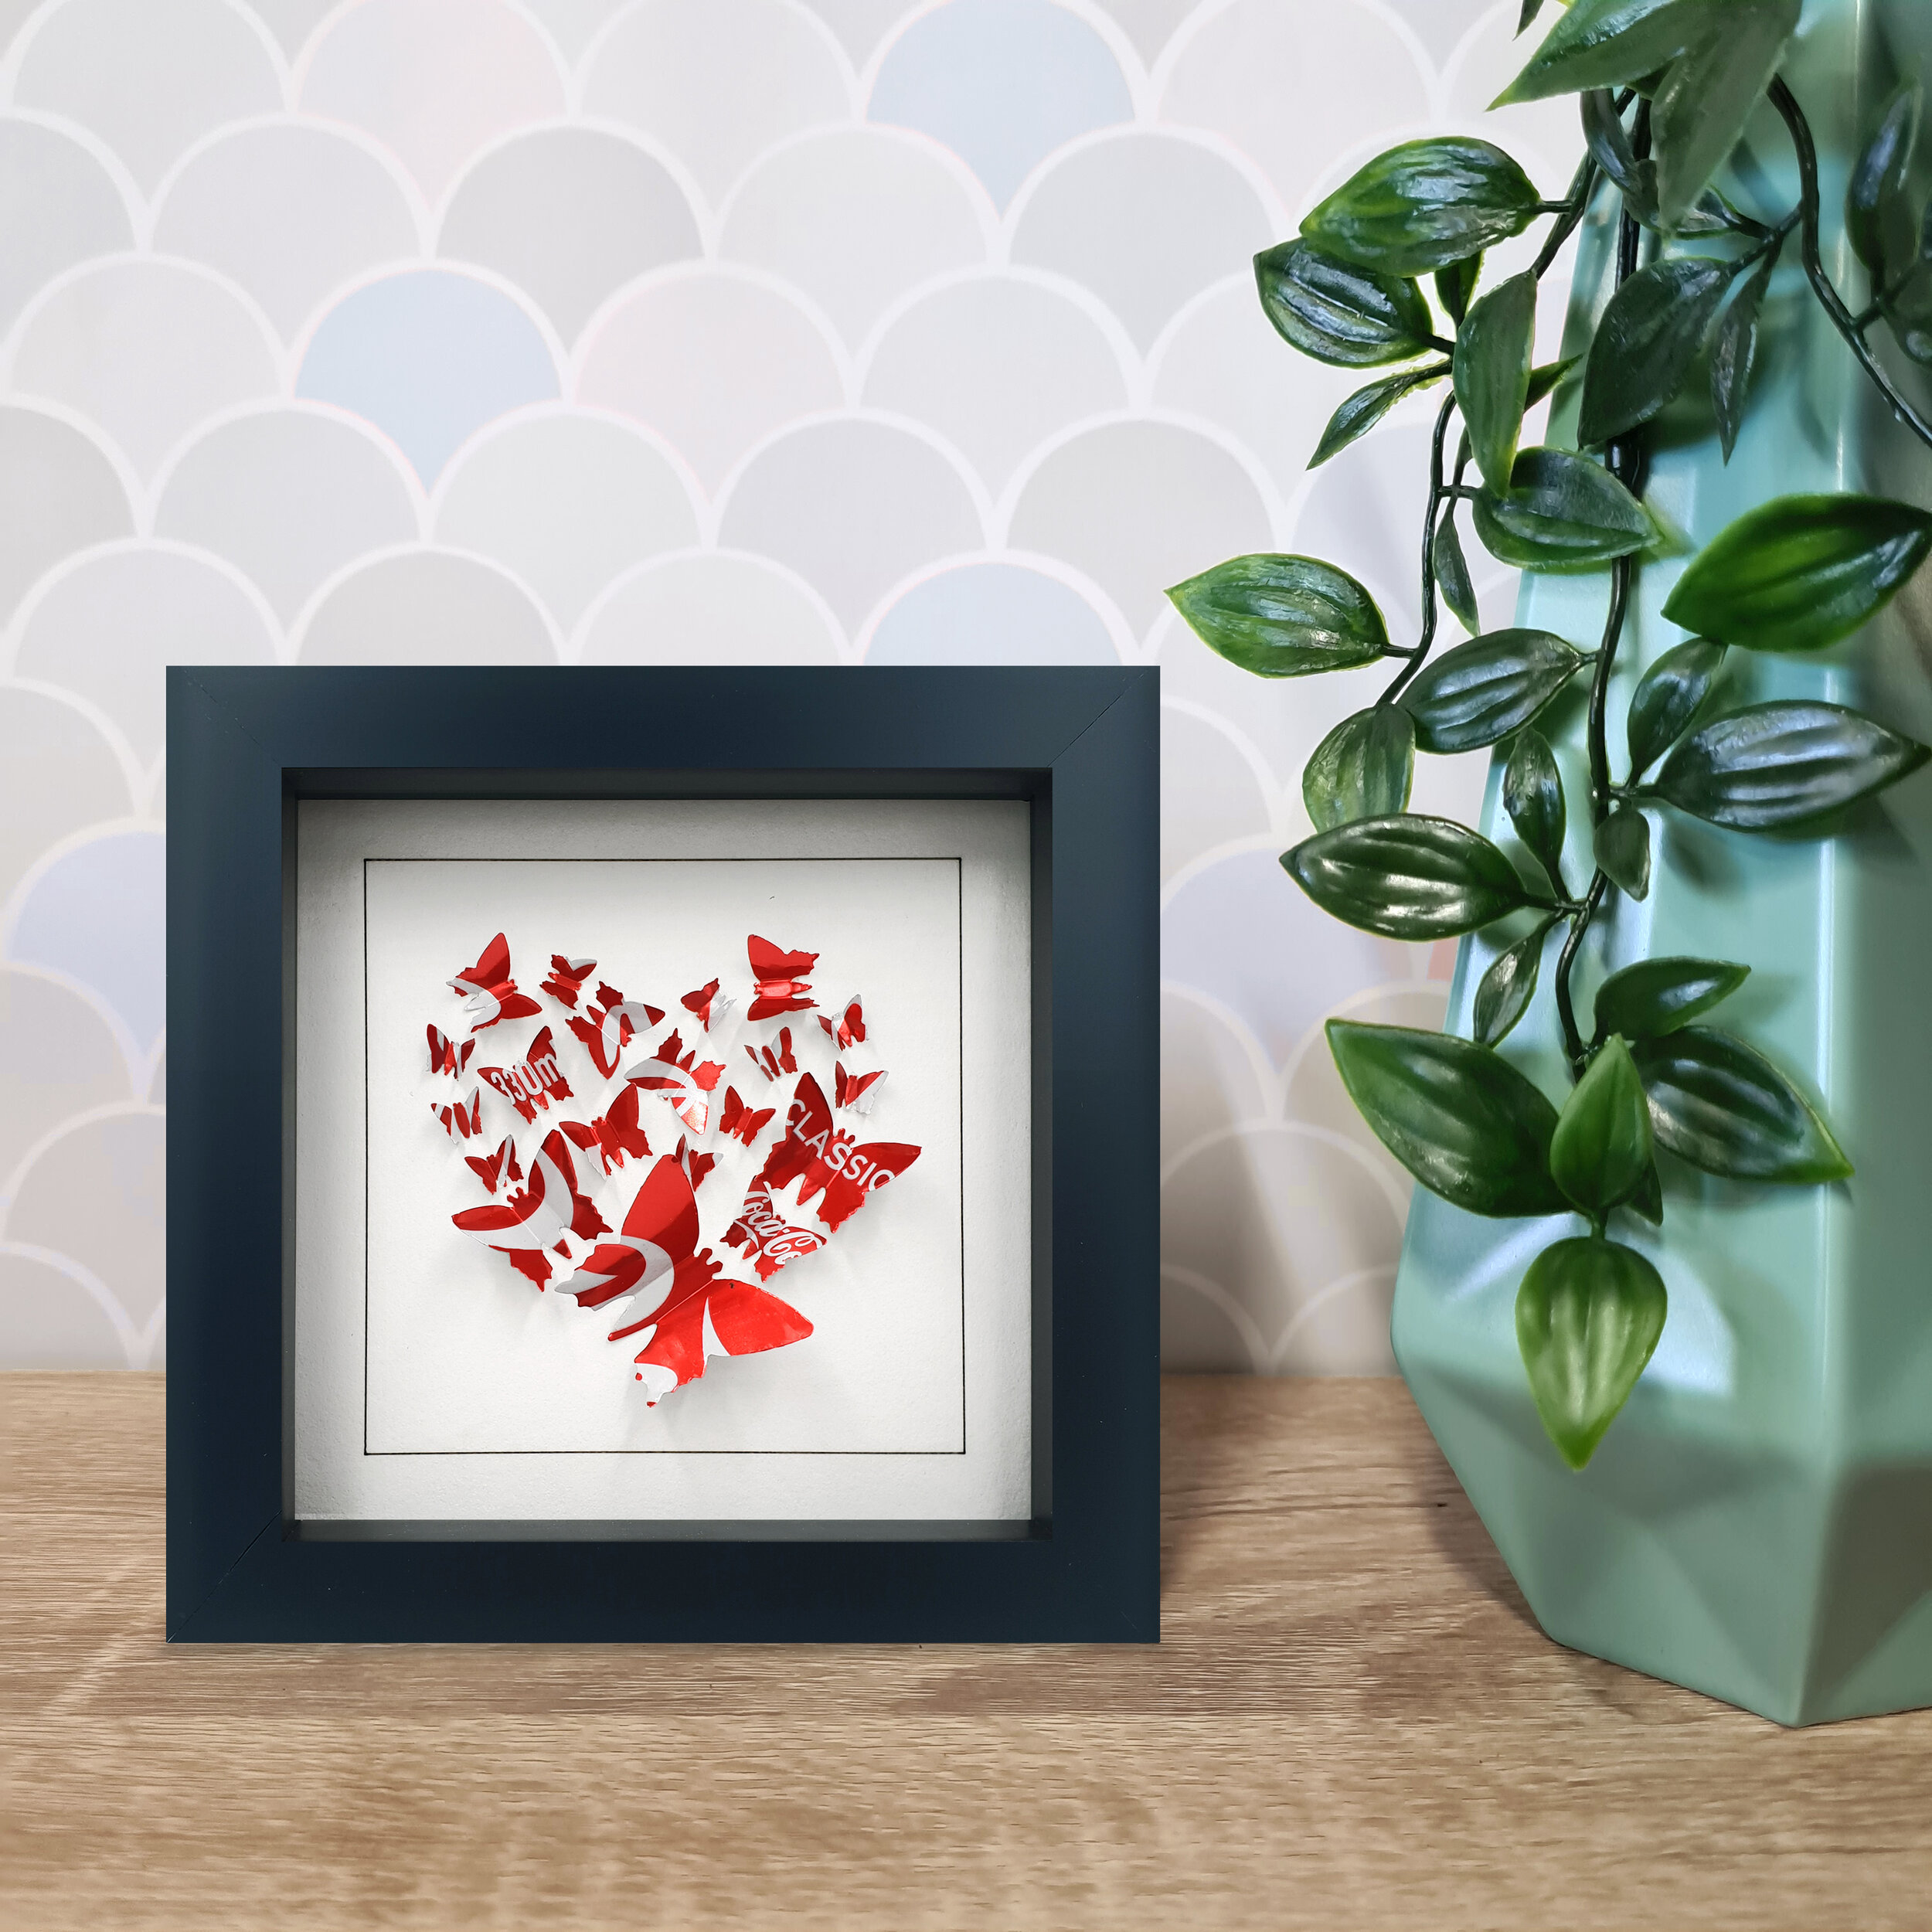 Coca-Cola red and white butterfly heart home decoration 